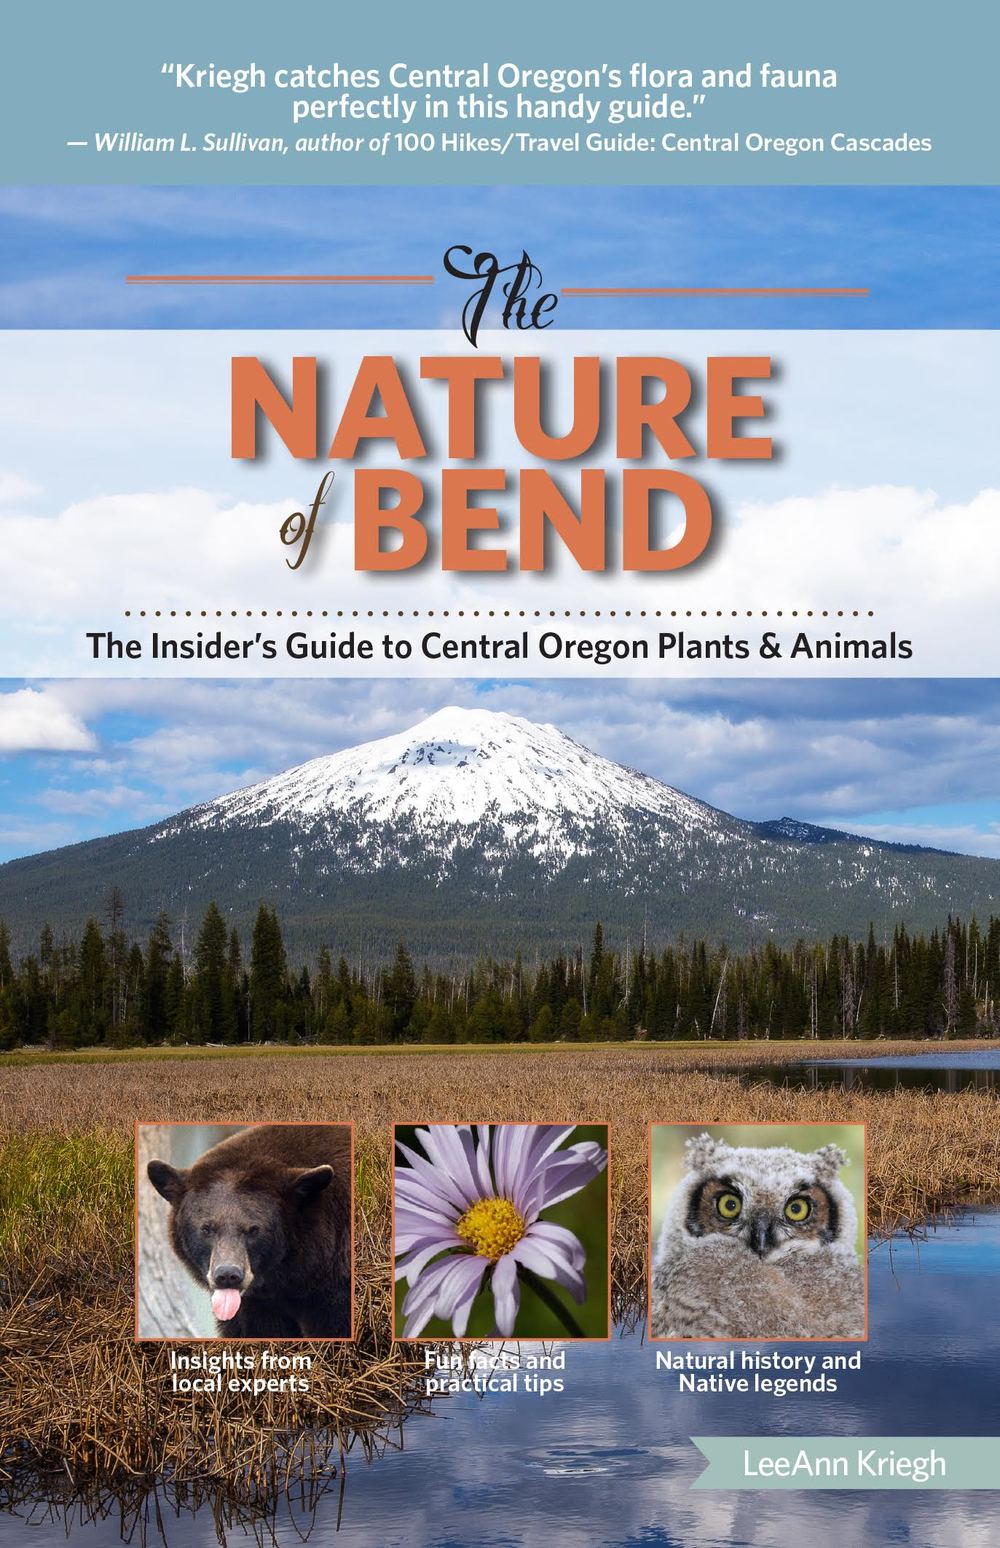 The Nature of Bend